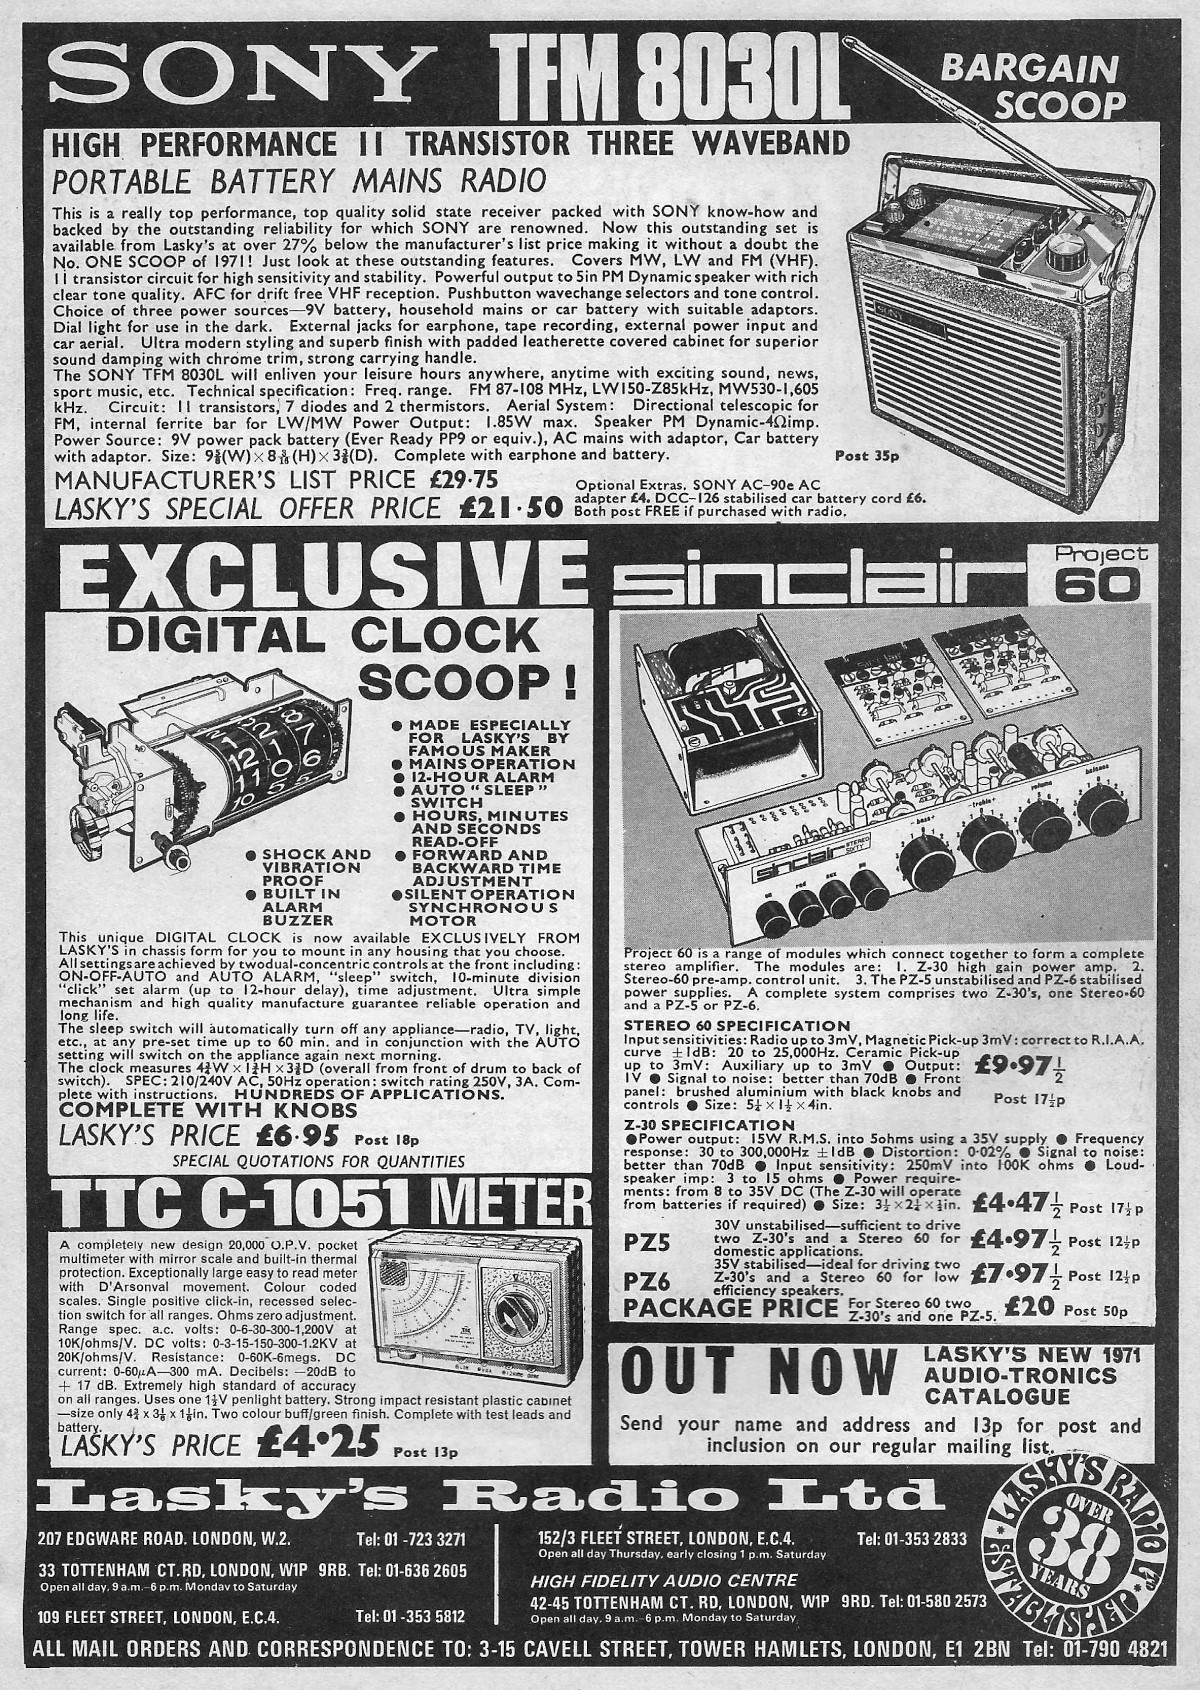 In a spooky echo of the future, Lasky's in 1971 - as Lasky's Radio Ltd - is also selling a Sinclair product, in this case audio components from the Project 60 range. From Practical Electronics, March 1971